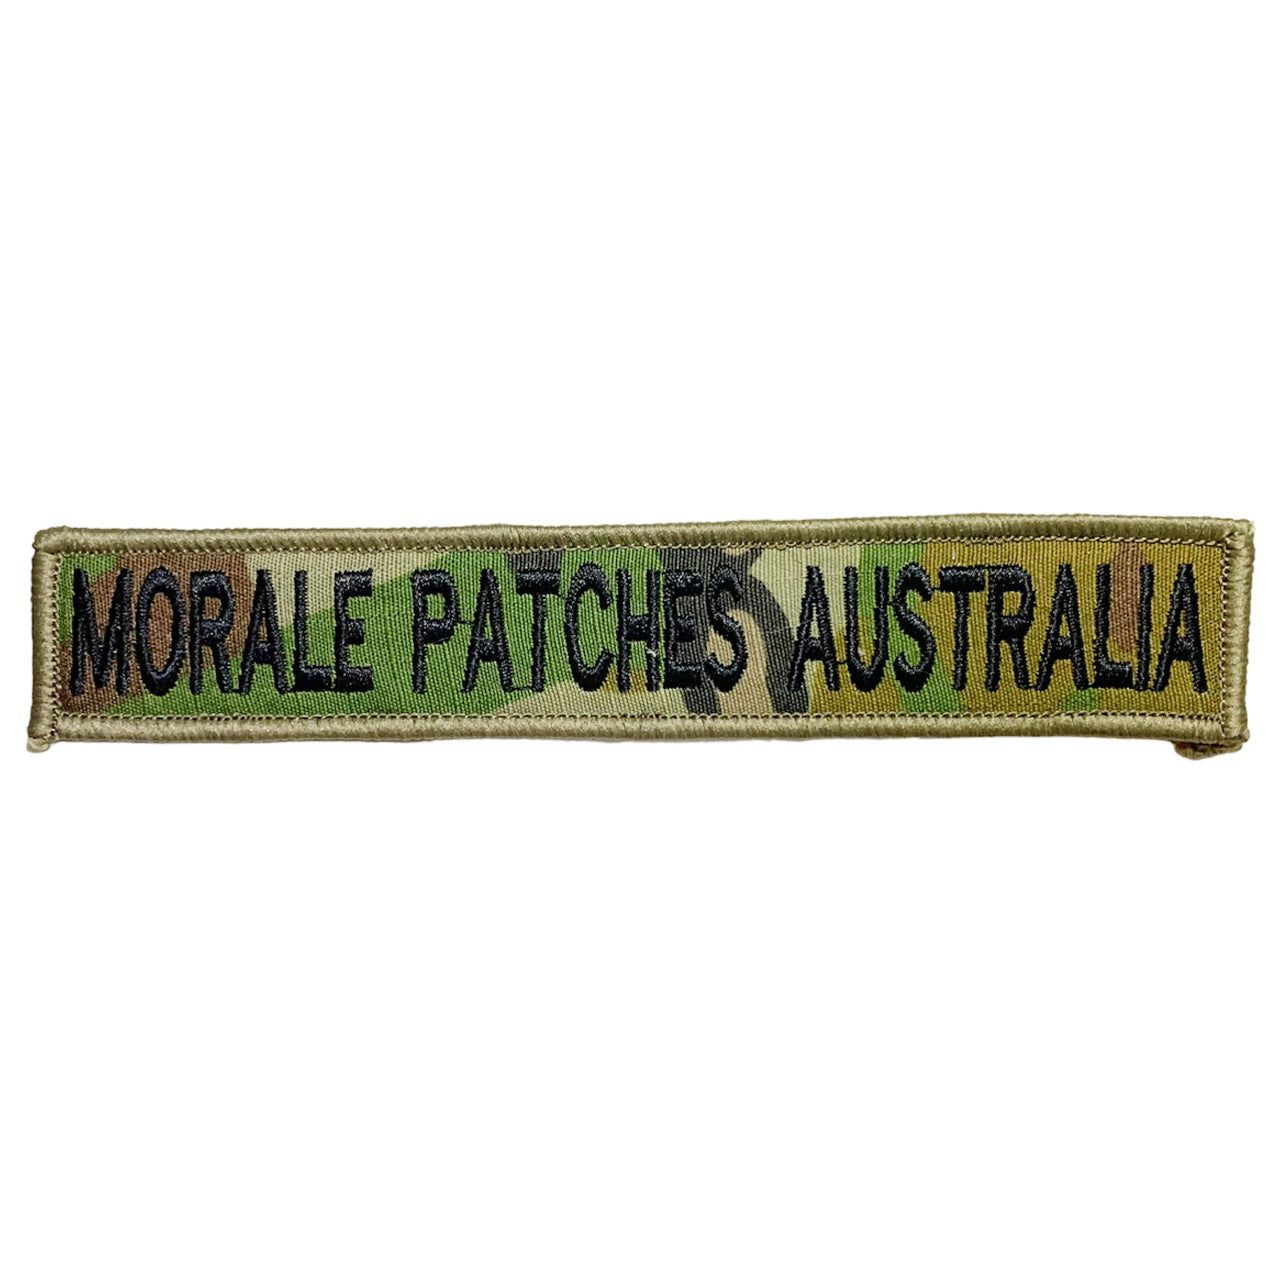 Name tag in AMC material, size is 2.5cm x 15cm, lettering is 1.5cm in height.  All embroidery is done in upper case letters only as a FYI.  These are great for cadets.  Don't forget you can even add the velcro backing and use them on your field gear or even dog vests.  Made on the Gold Coast, please support Australian made www.moralepatches.com.au